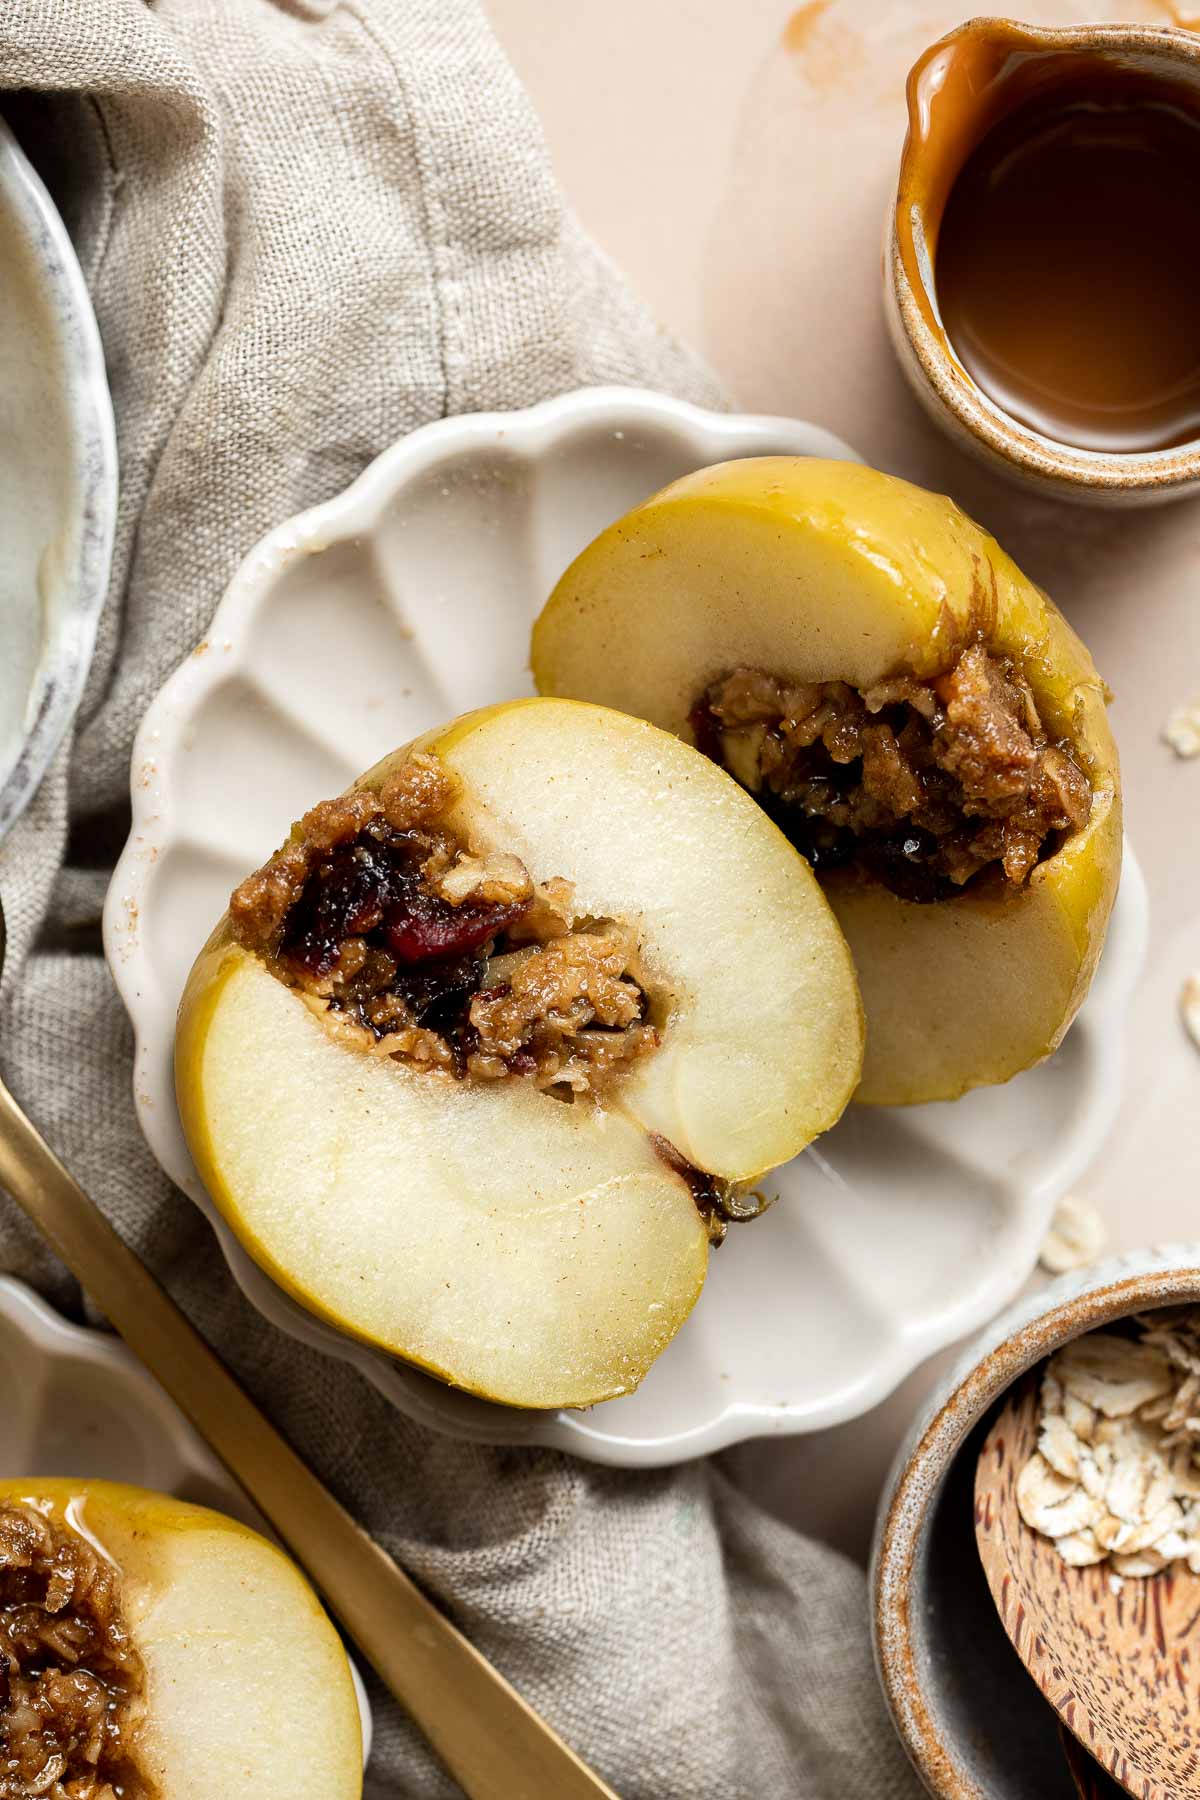 Baked Apples are soft, warm, and tender, with a crunchy sweet cinnamon oat filling. This cozy and comforting fall dessert is quick easy to make too. | aheadofthyme.com